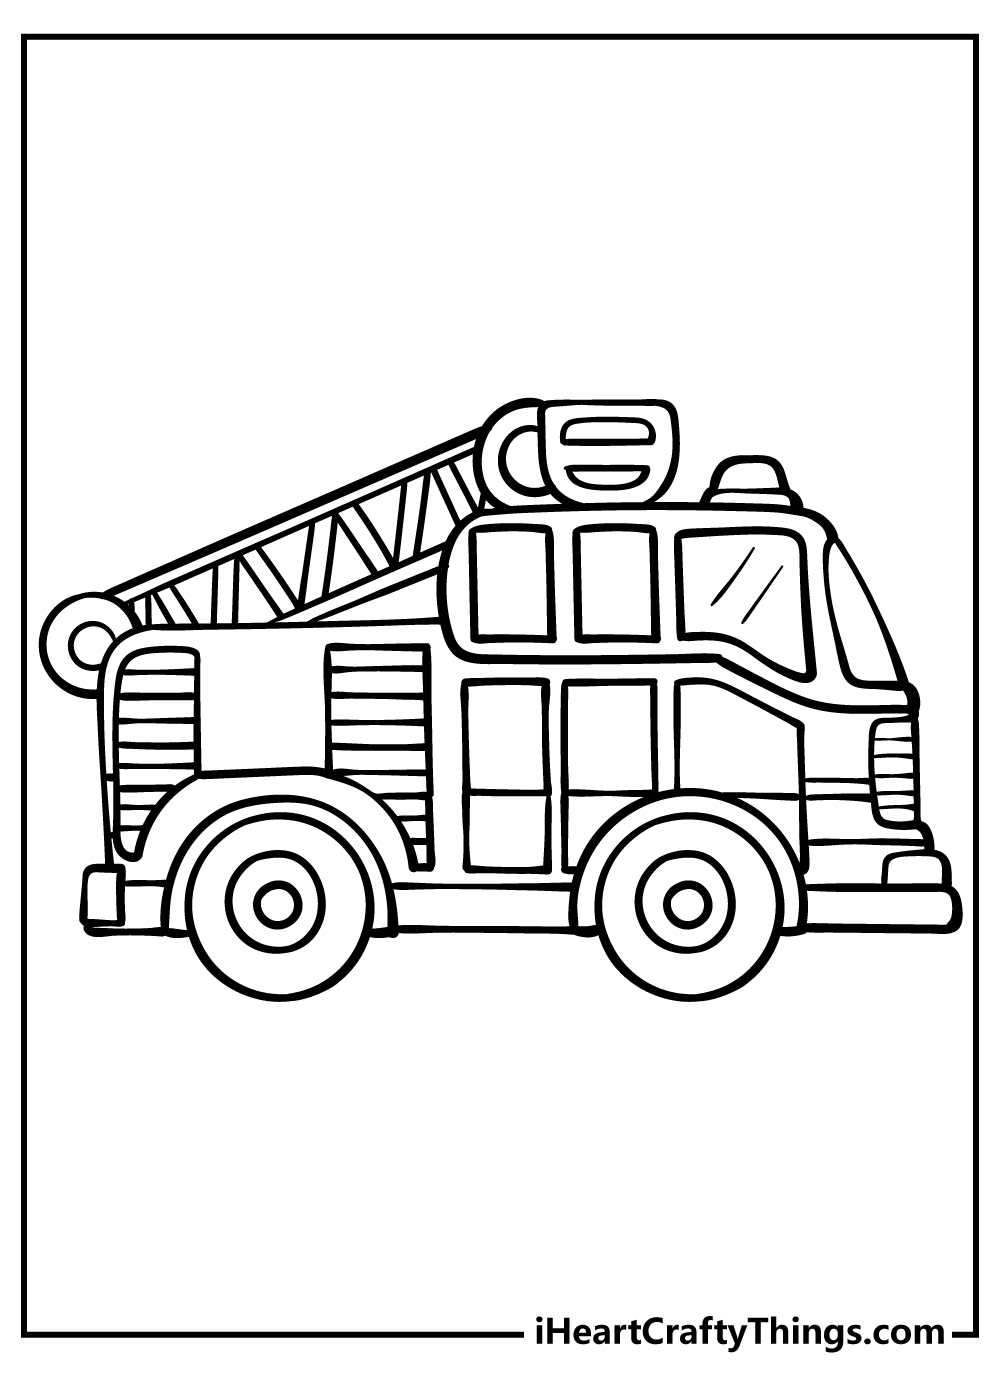 Fire Truck Easy Coloring Pages